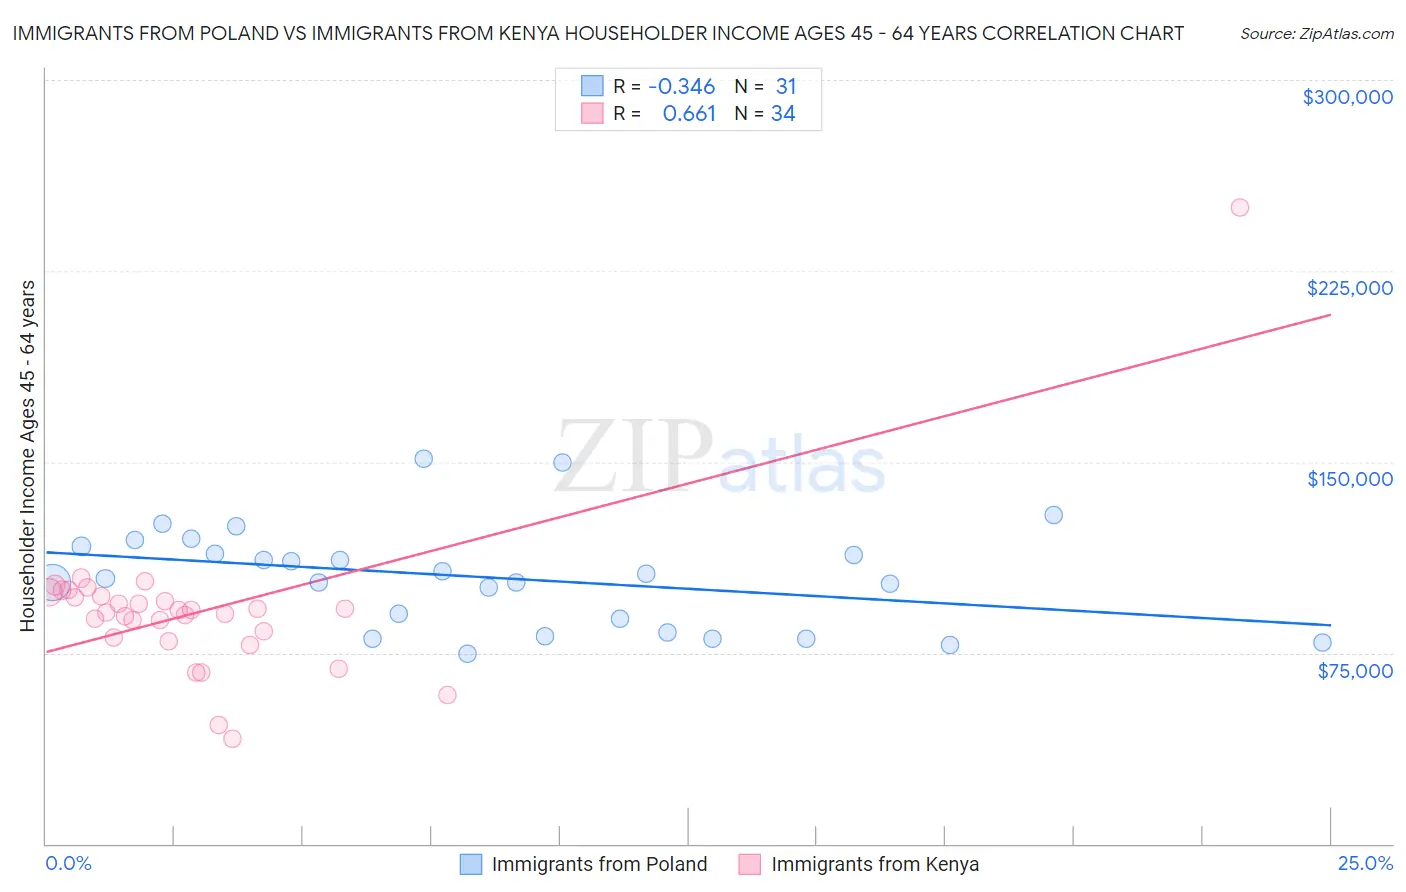 Immigrants from Poland vs Immigrants from Kenya Householder Income Ages 45 - 64 years